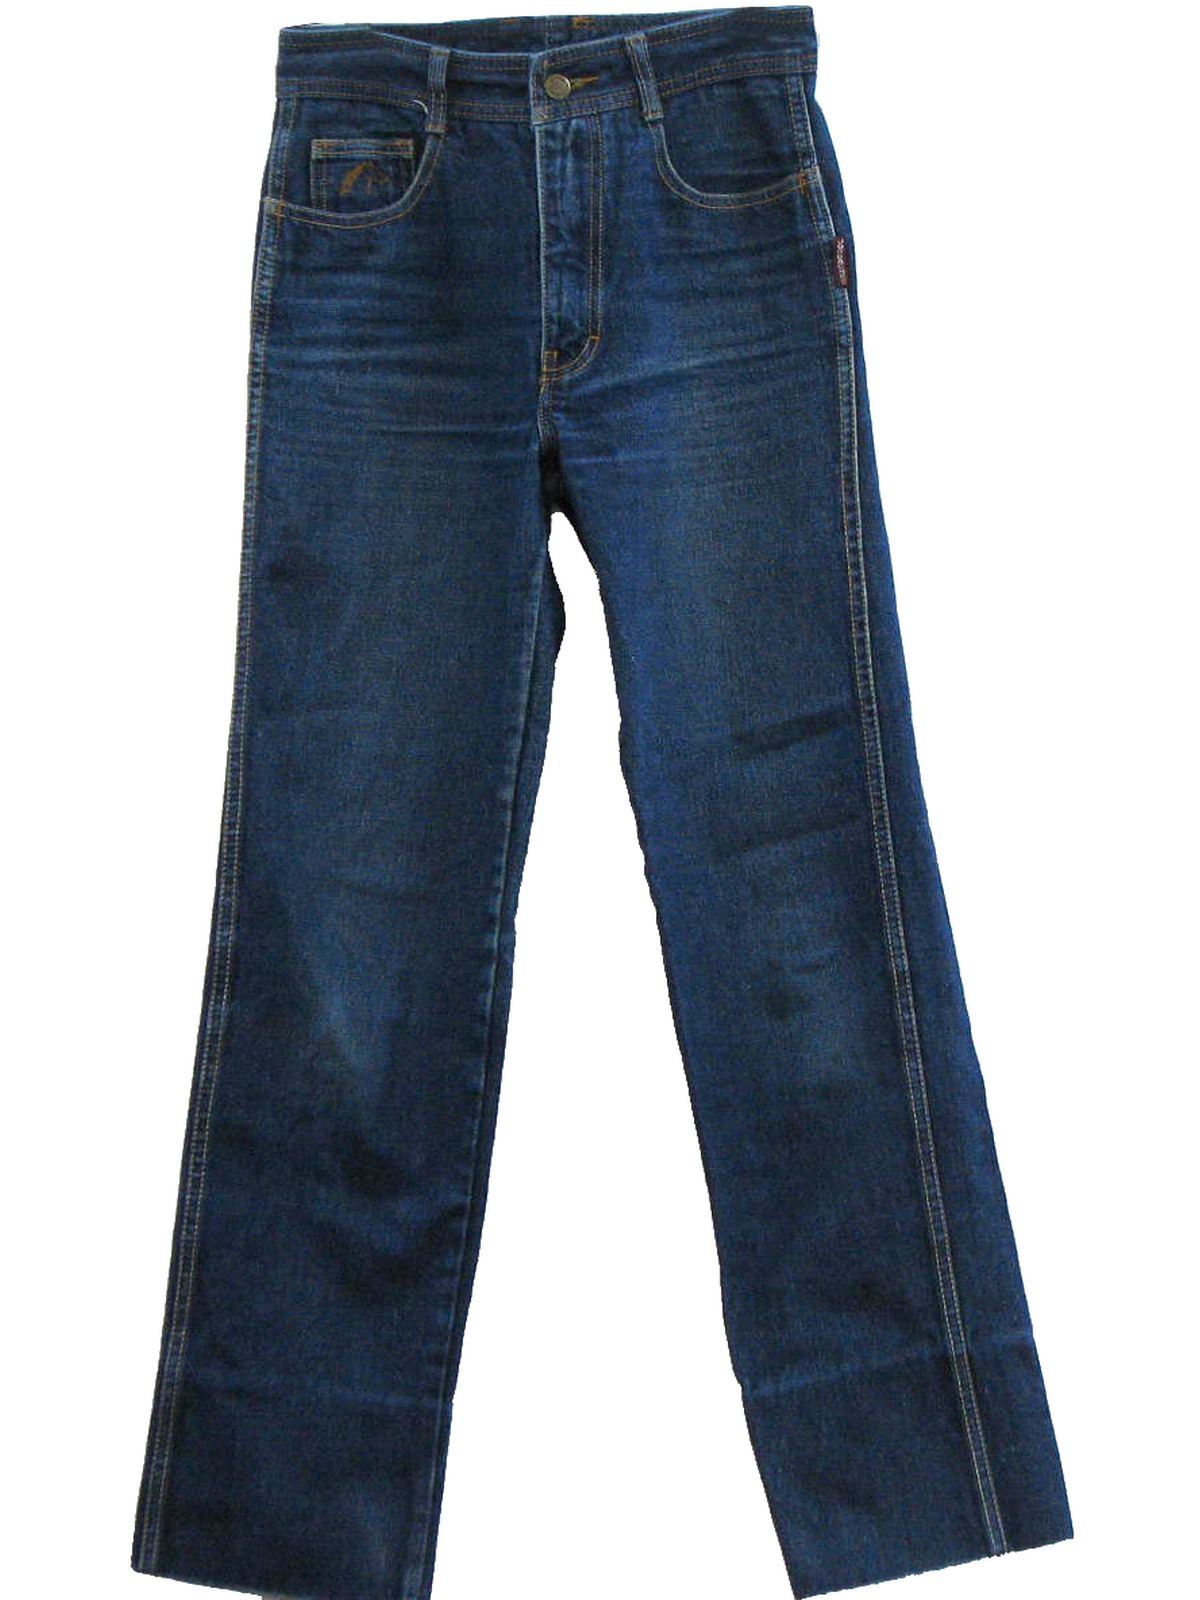 Retro Pants (Jordache) : 80s -Jordache- Mens blue cotton five pocket style straight leg jeans pants. Contrasting top stitching on the seams and detailed back pockets, Jordache logo on the